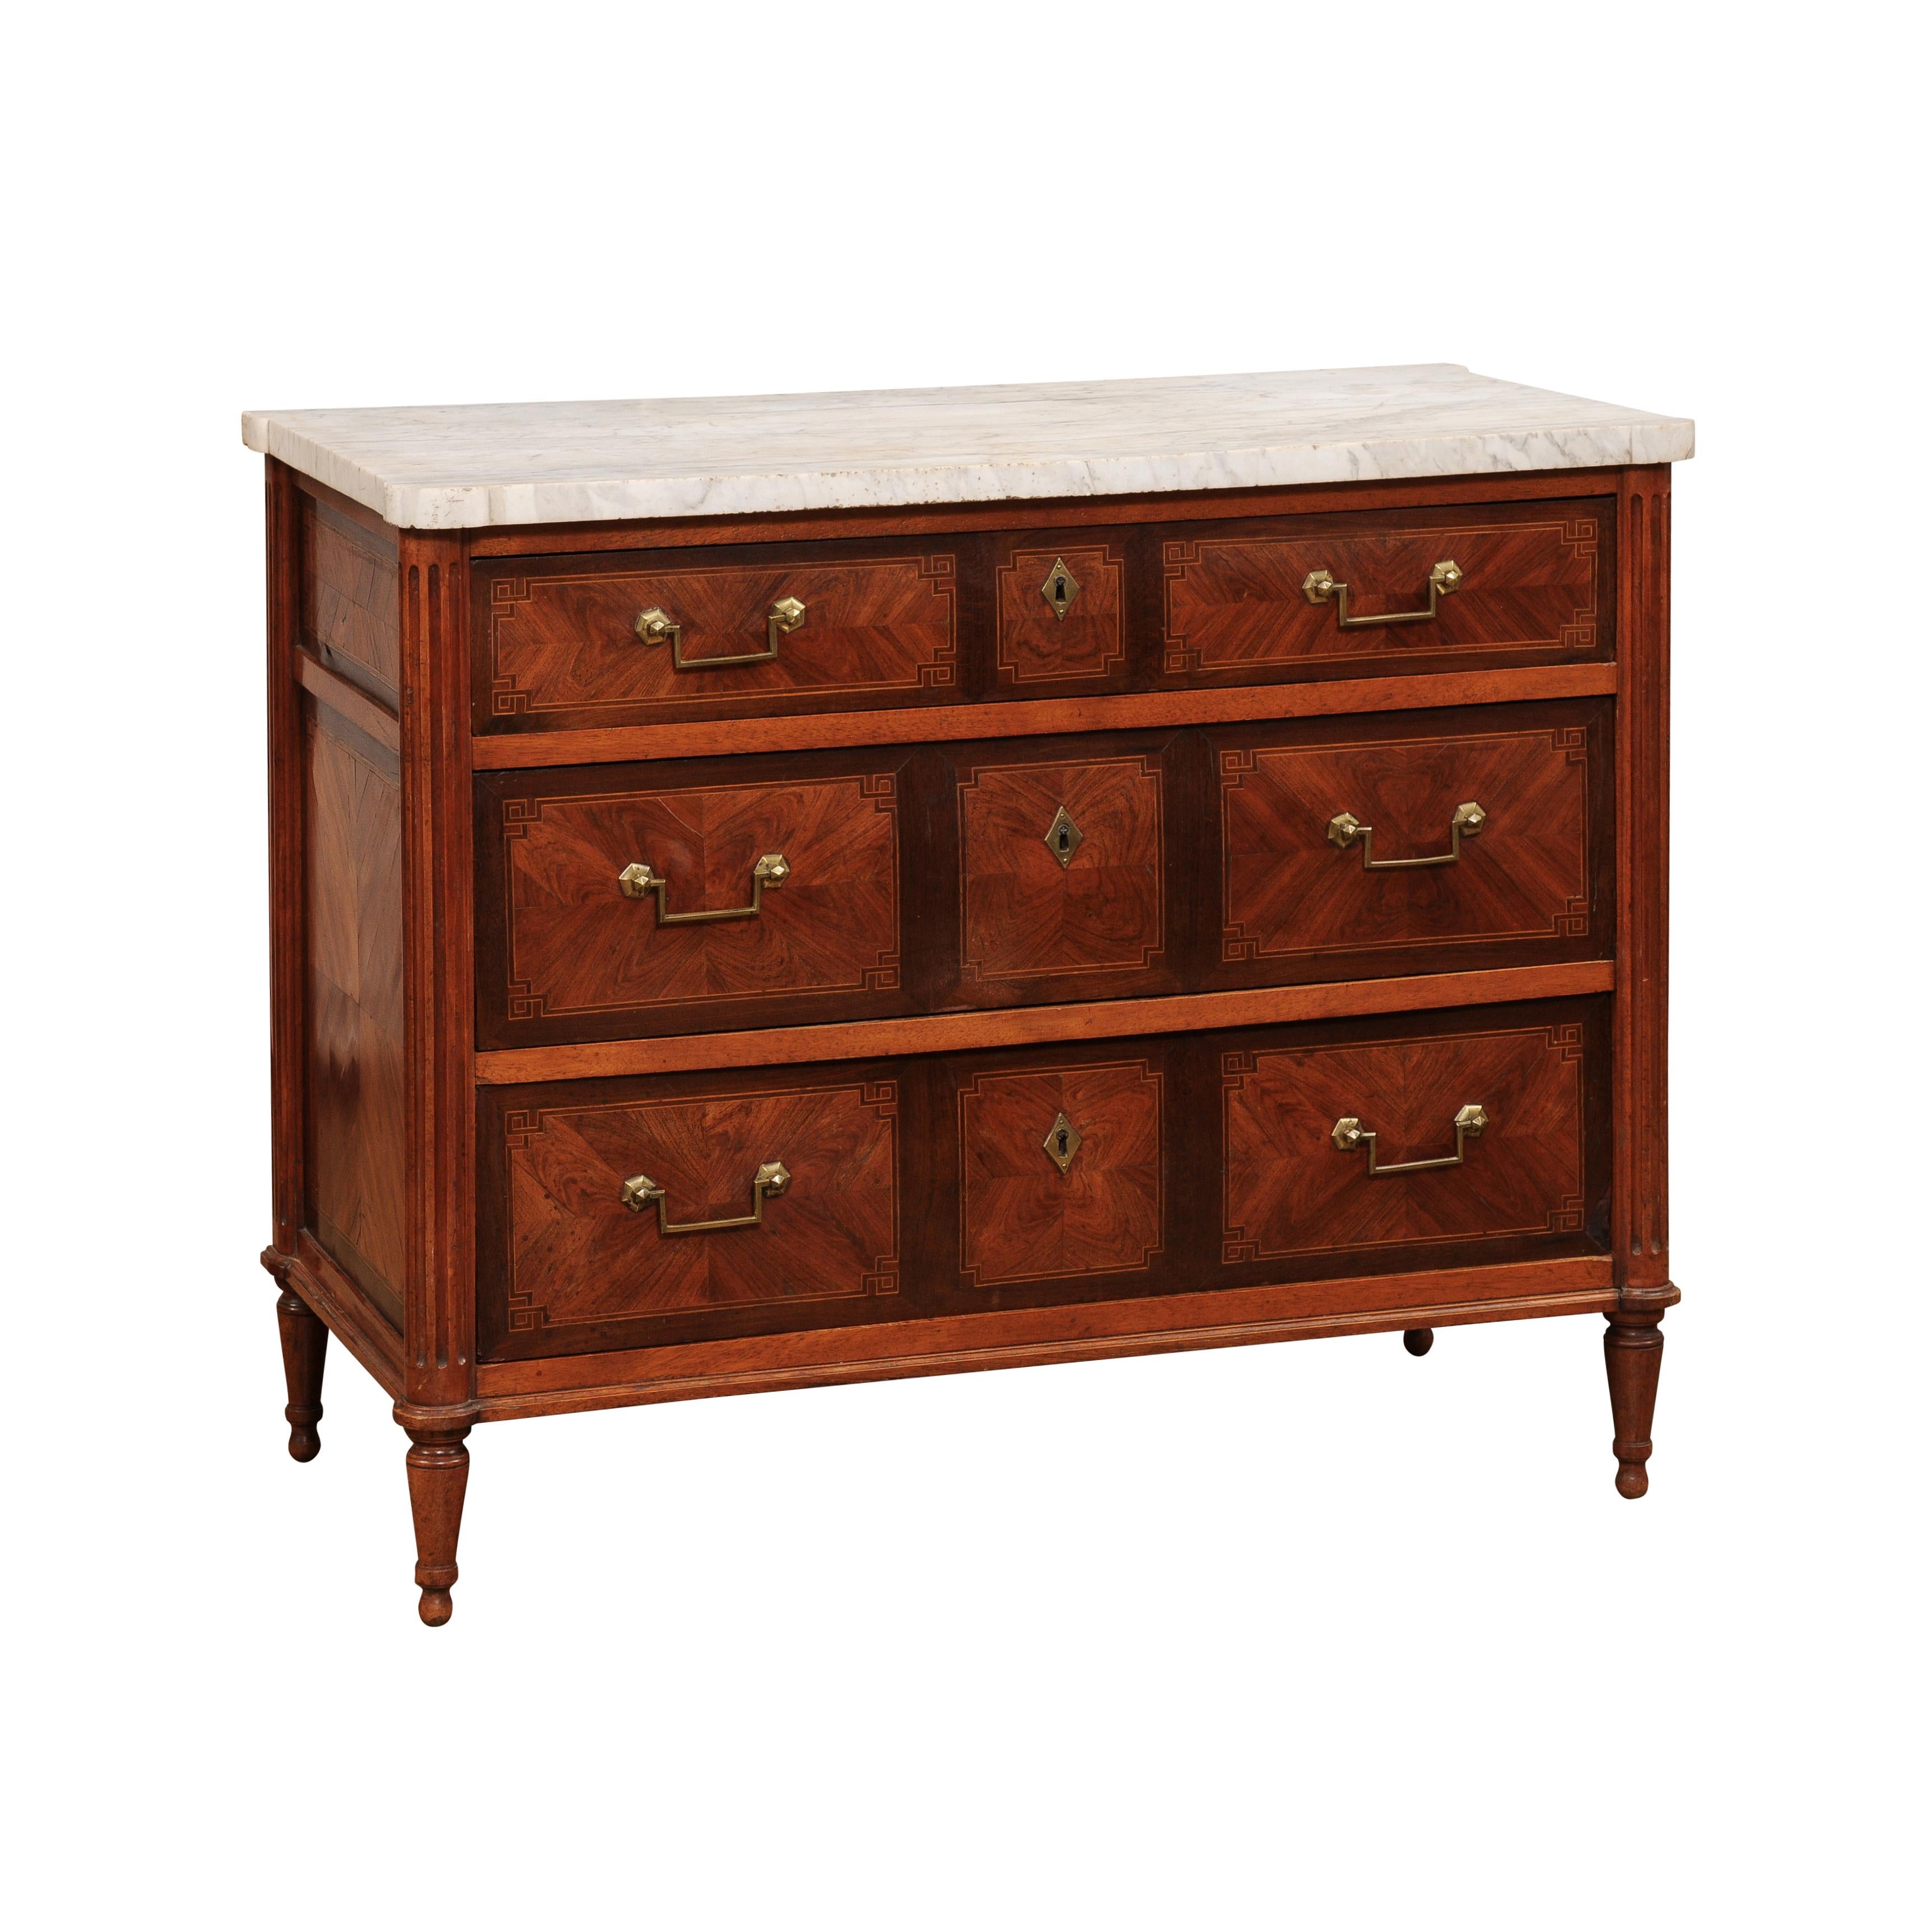 A French mahogany and rosewood commode from the 18th century with white marble top, fine details and bookmatched veneer. Add elegance and sophistication to your home with this stunning French mahogany and rosewood commode from the 18th century.